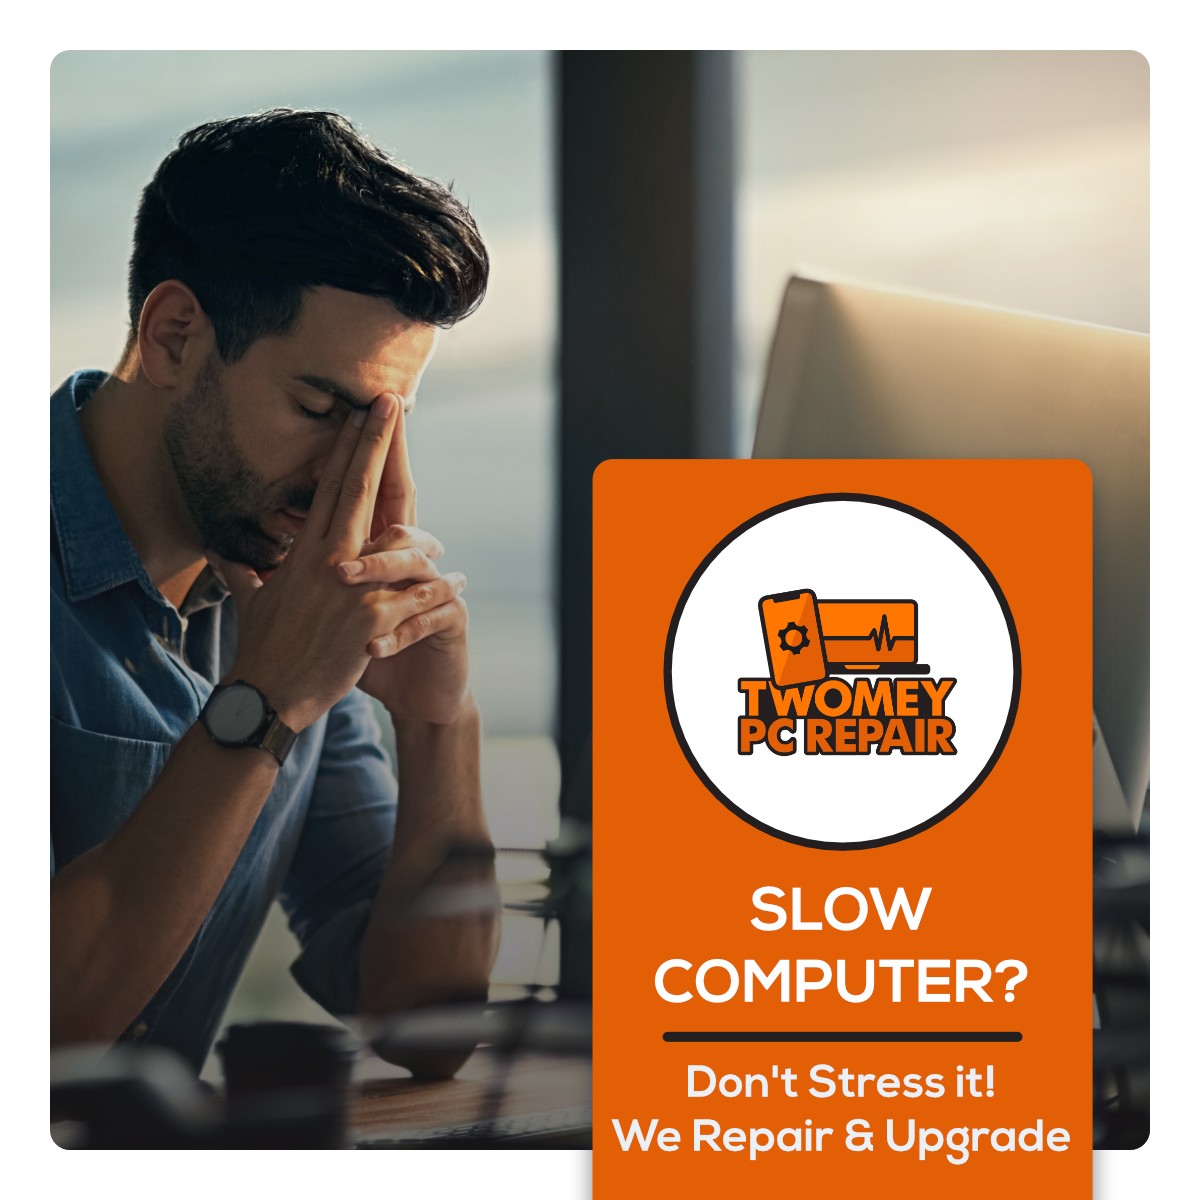 Slow computer? Don't stress, we offer computer repair and tune up services to clean up and upgrade your device.